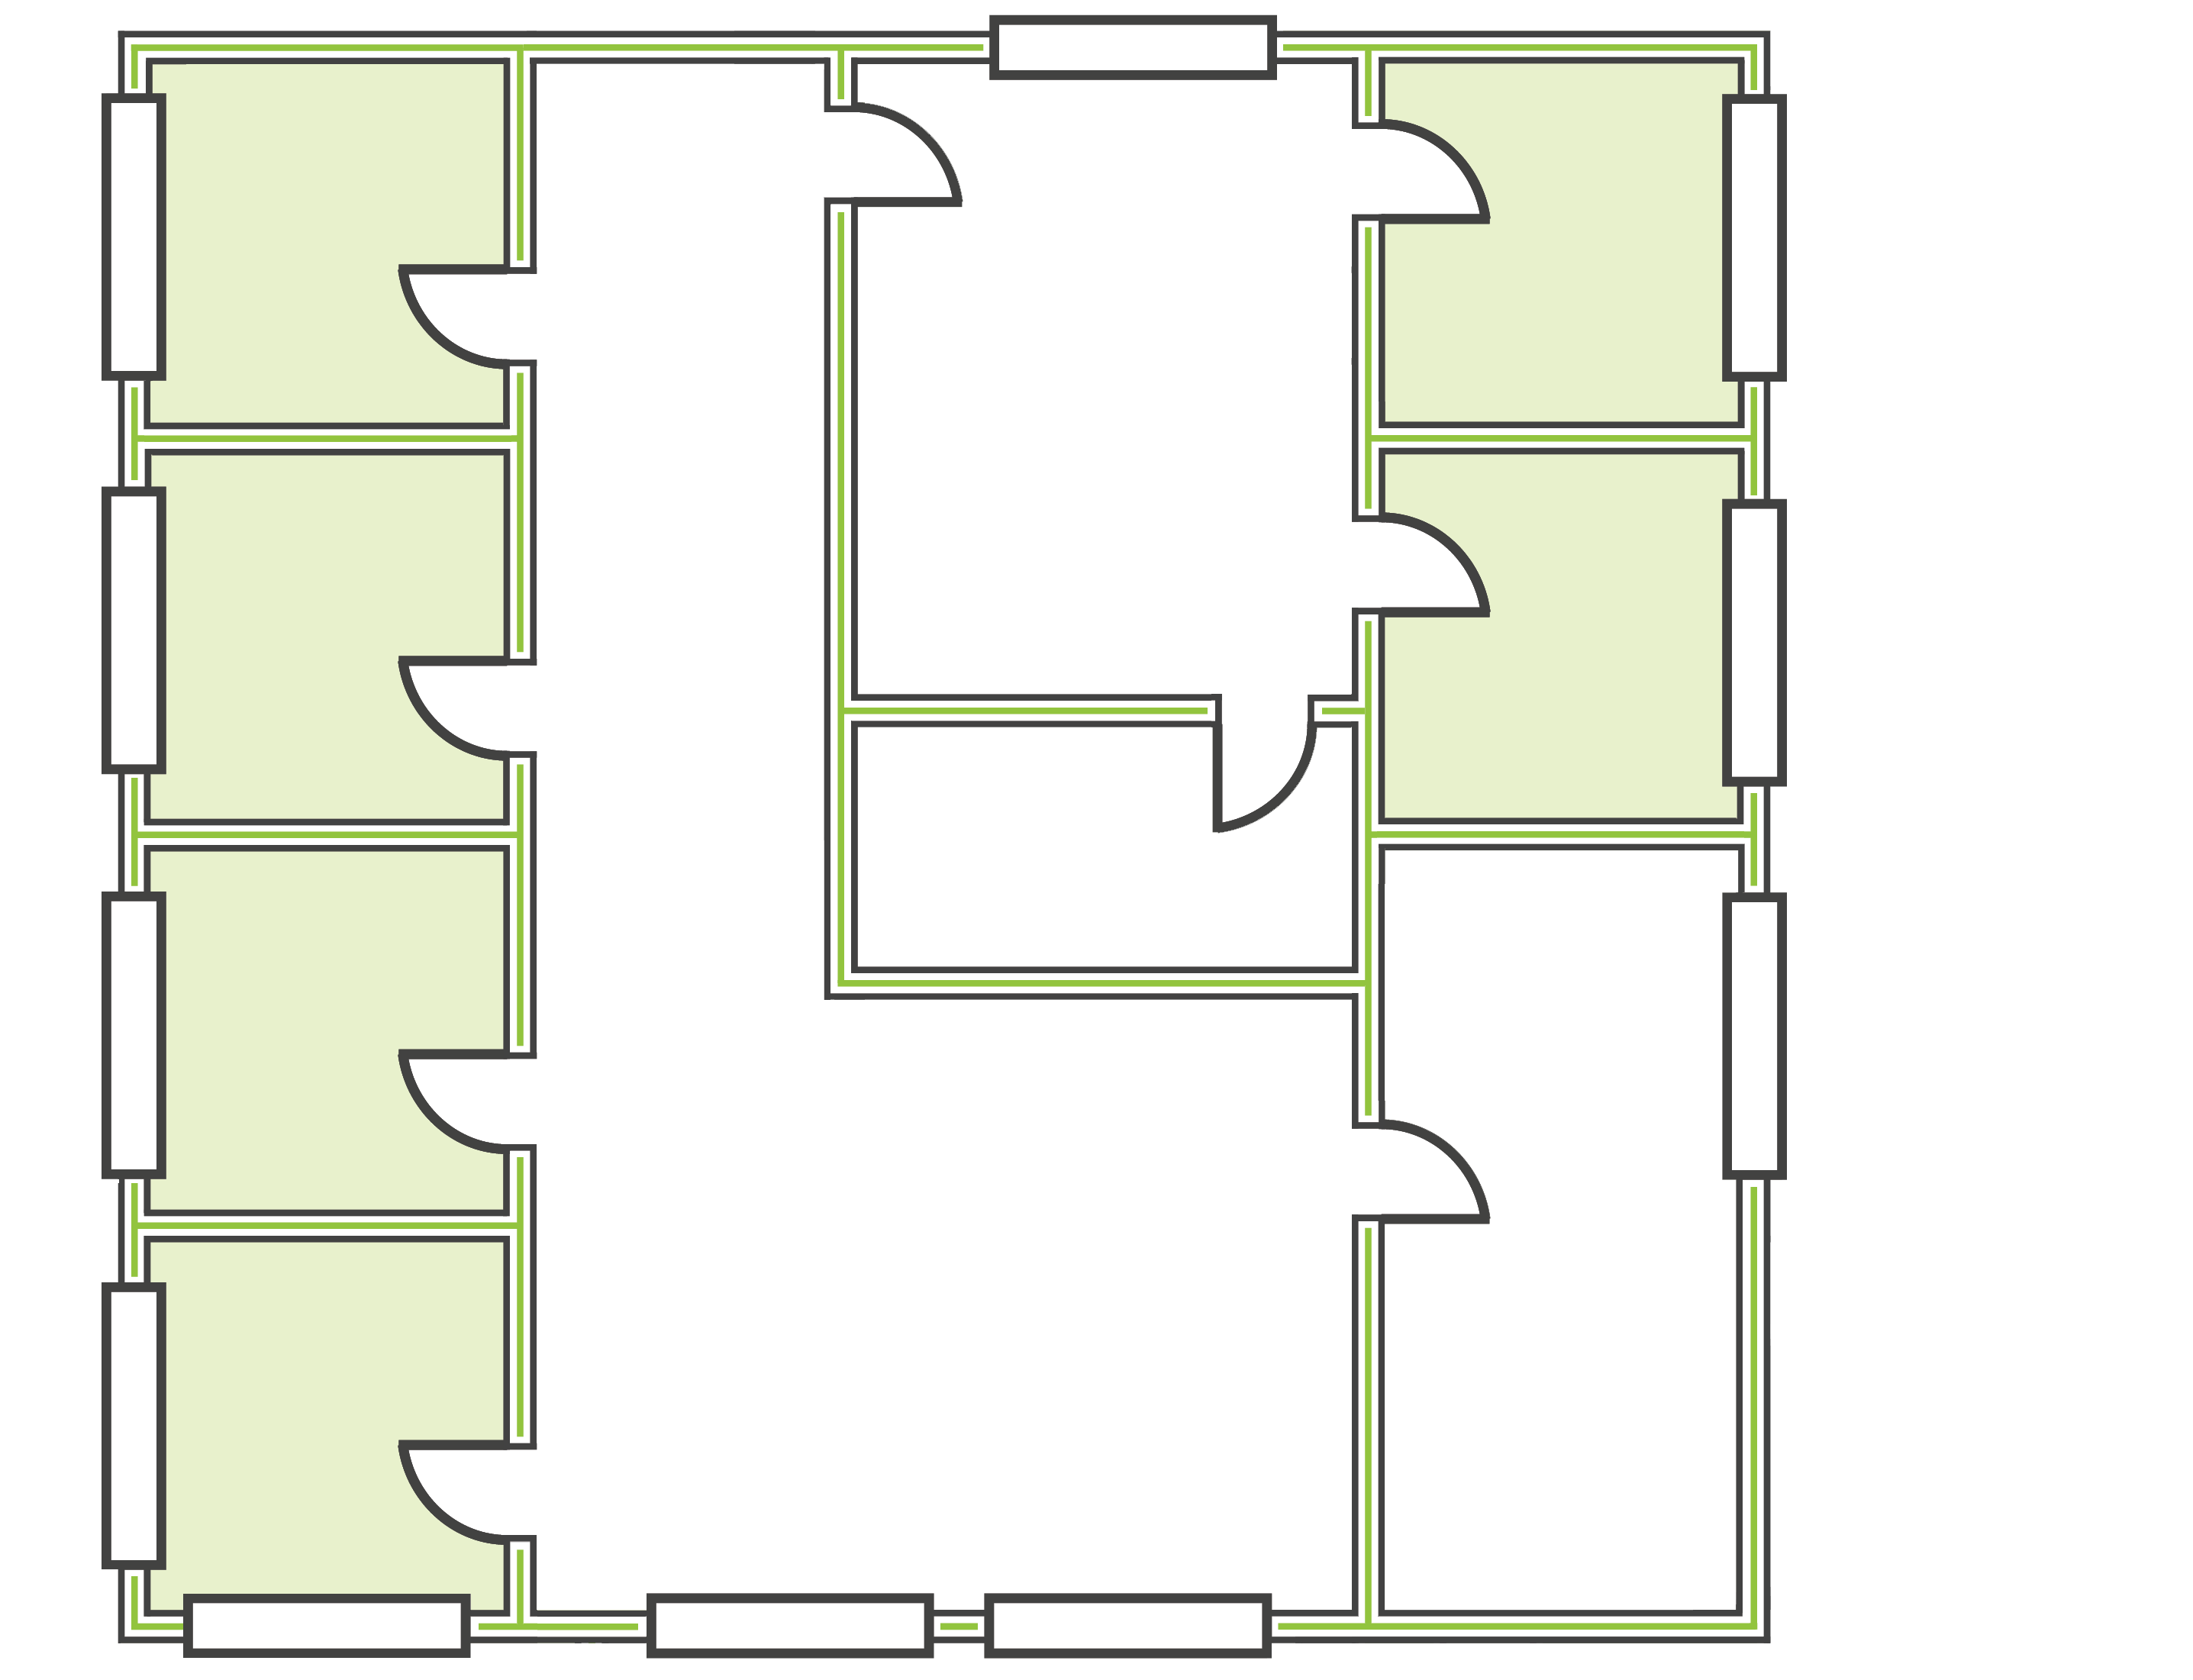 6 small rooms